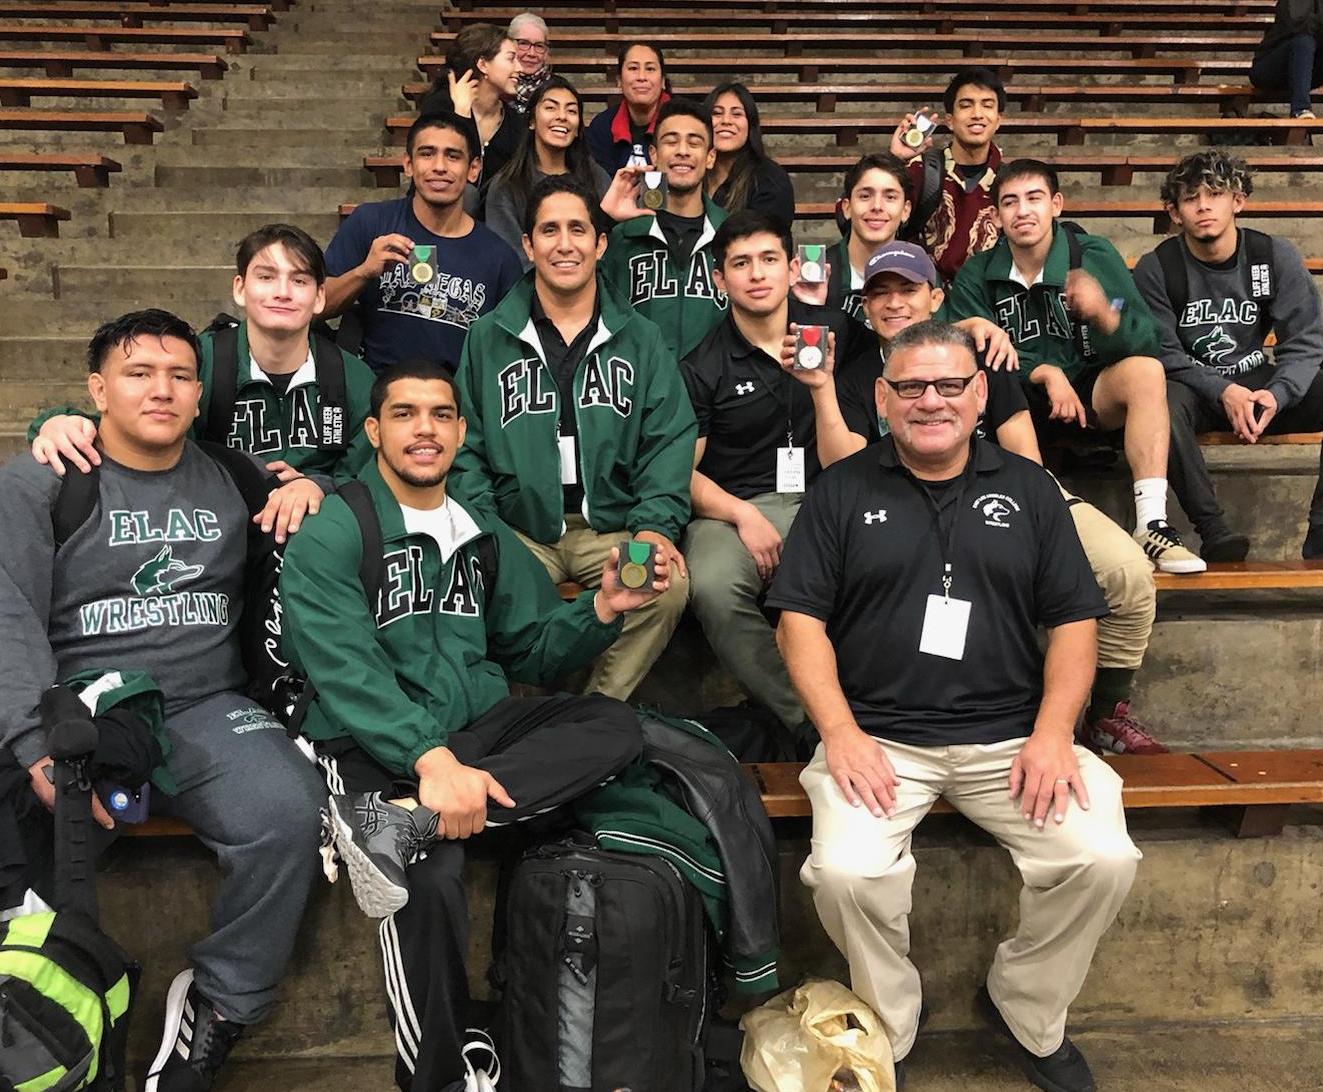 Ralph Valle with the 2019-2020 team at the CCCAA South Regionals in Santa Ana